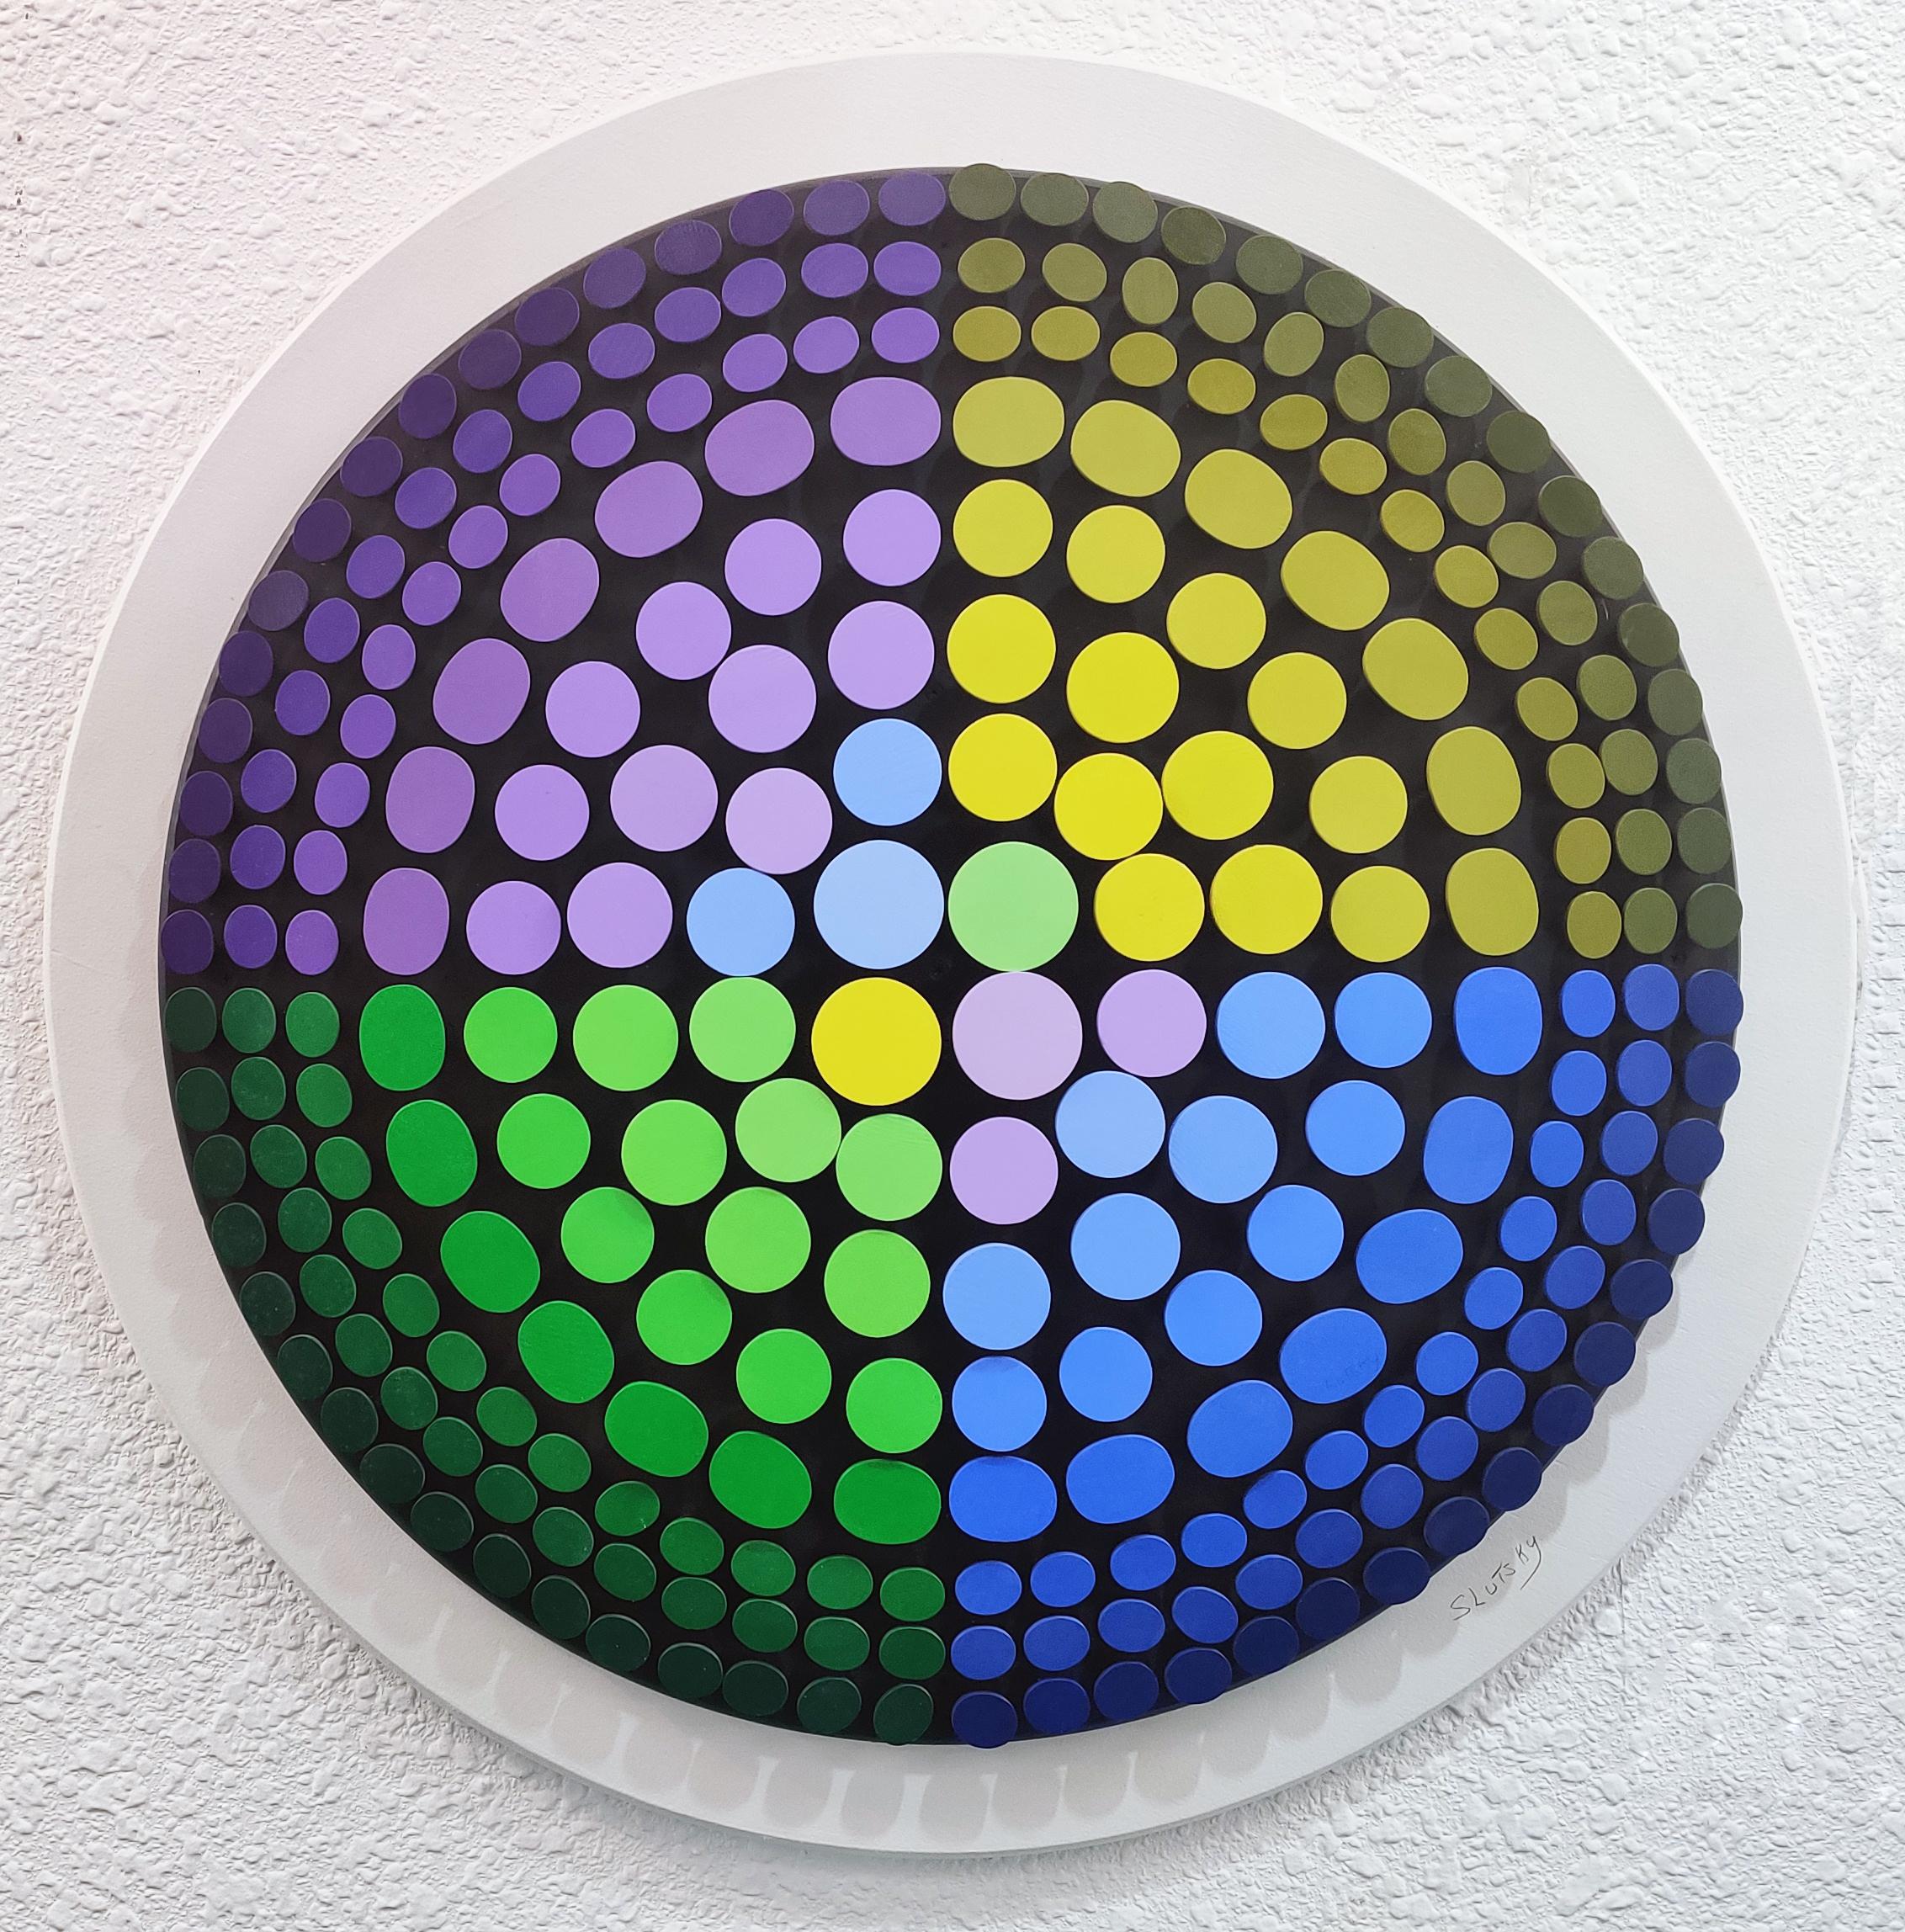 SPECTRUM (DIMENSIONAL PIECES OF WOOD WITH MAGNETS) - Mixed Media Art by Stan Slutsky